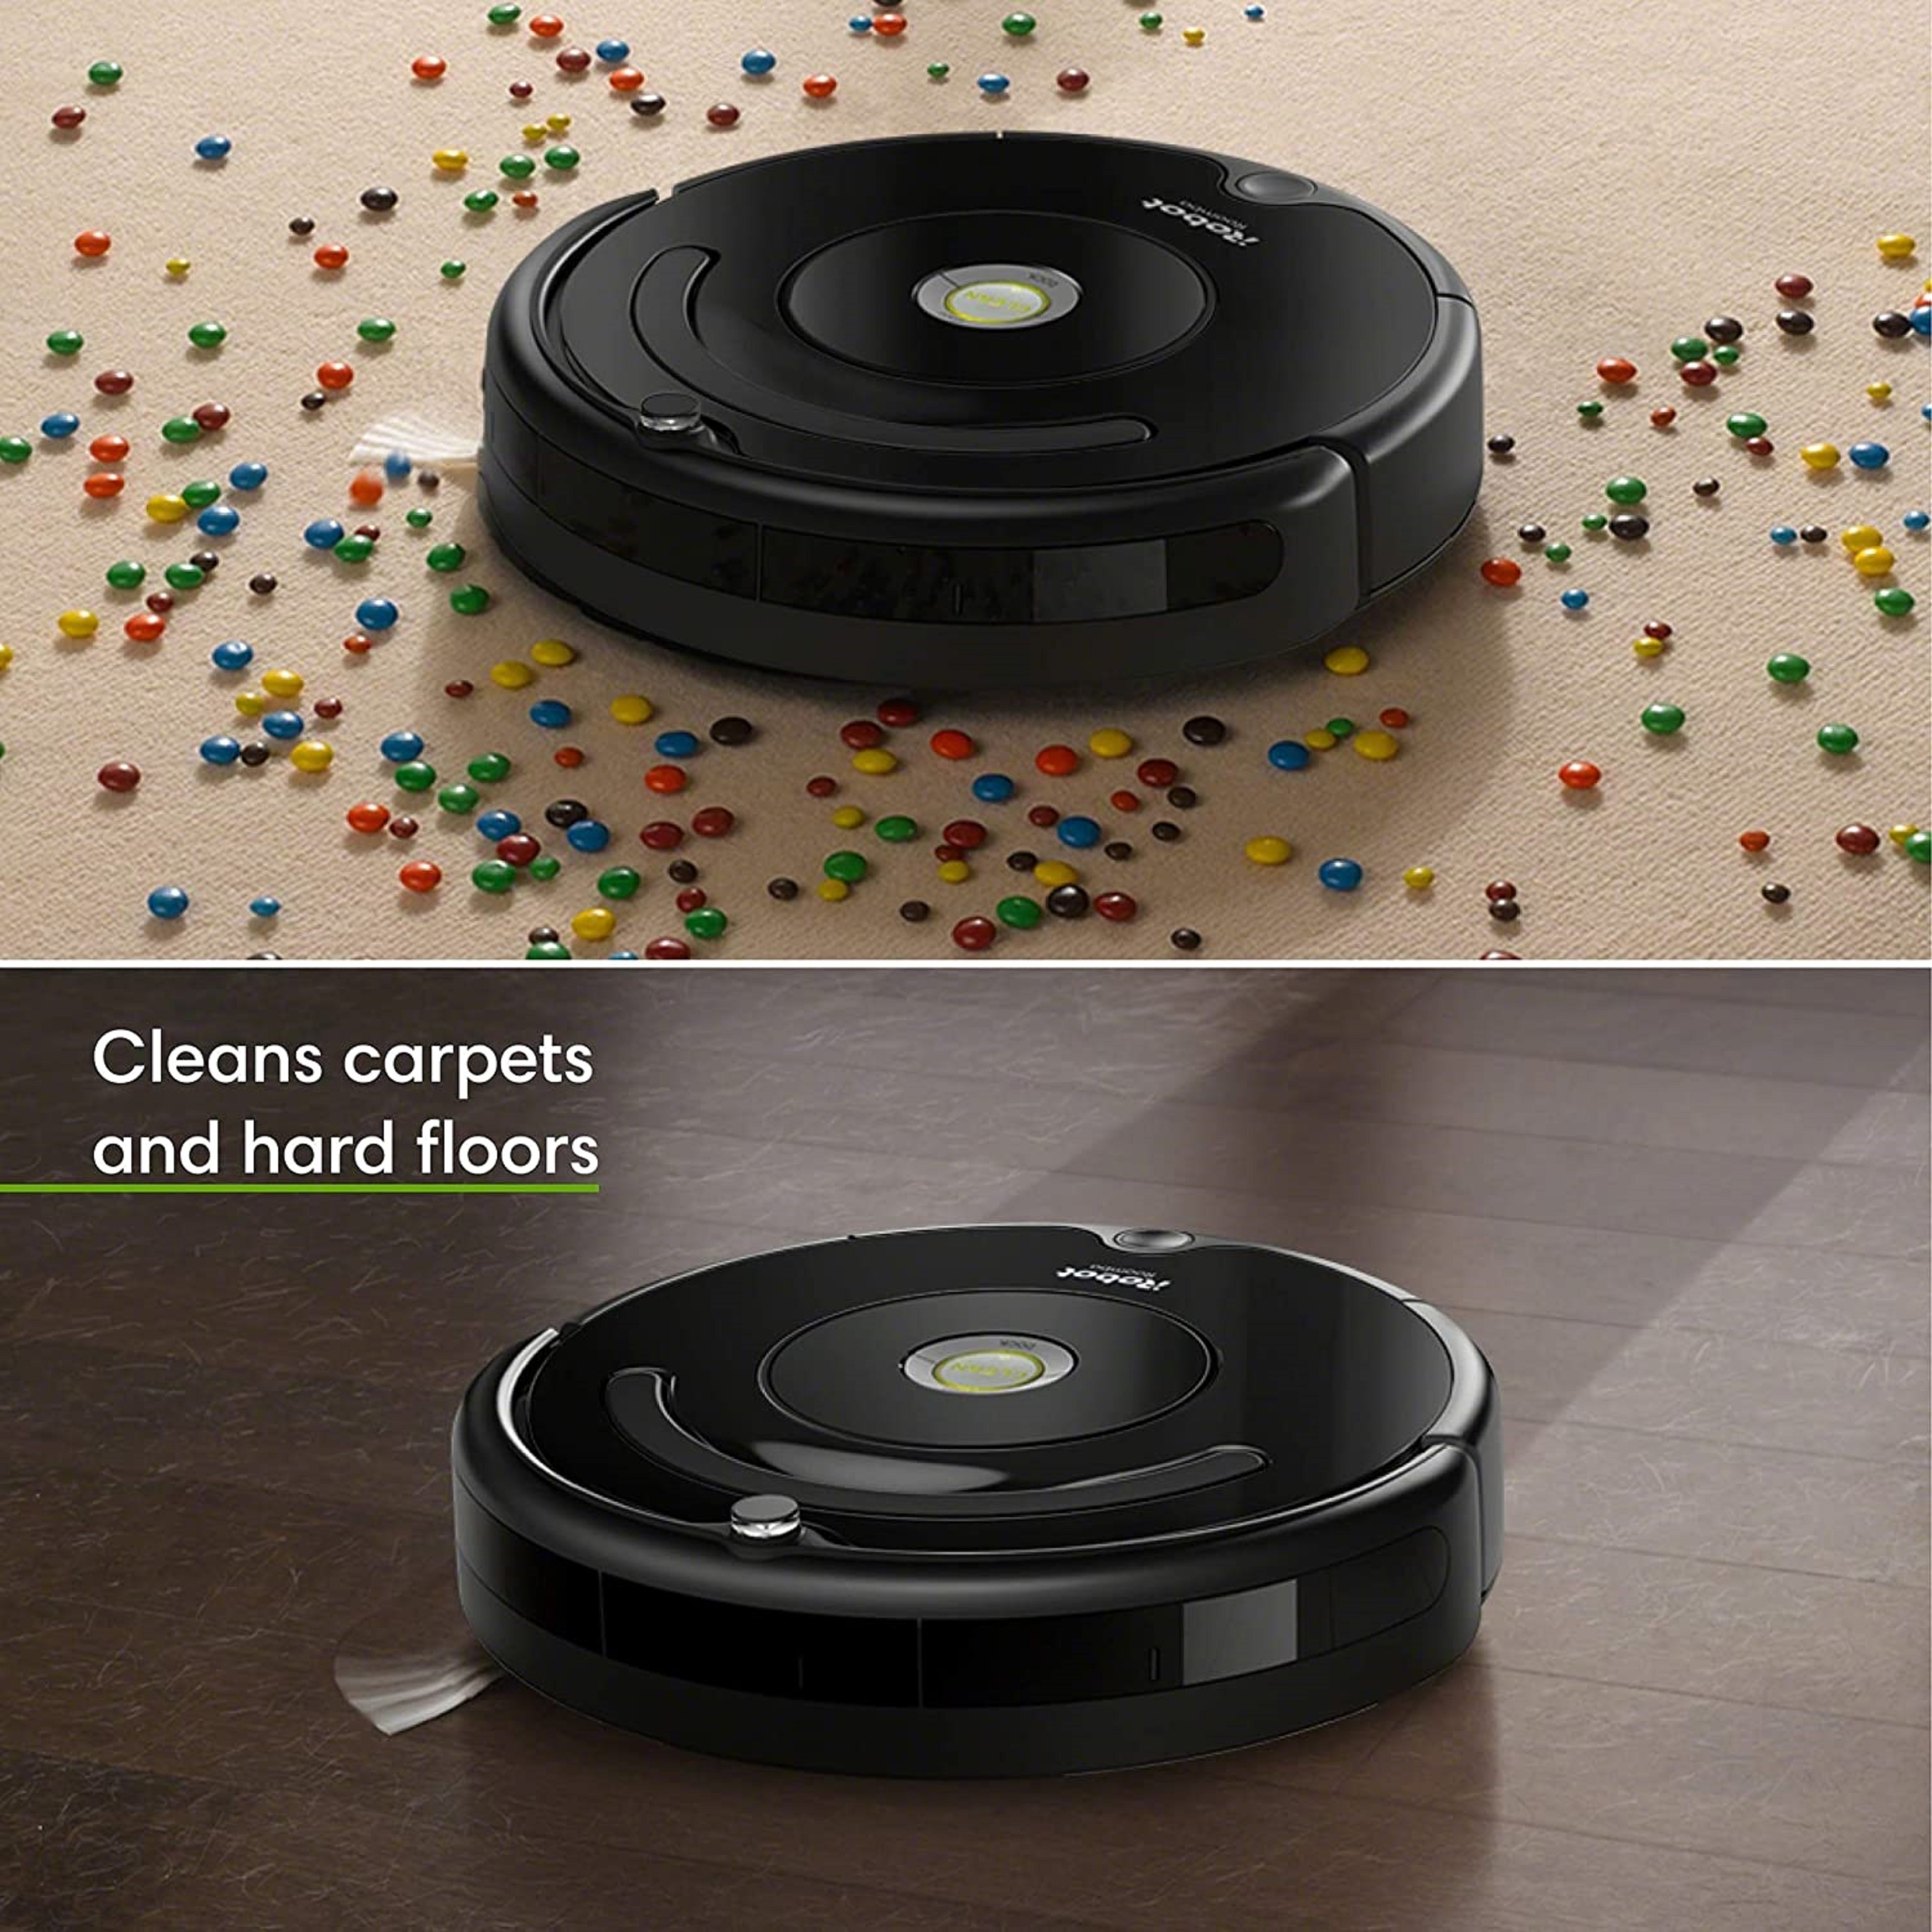 iRobot Roomba 671 Robot Vacuum with Wi-Fi Connectivity, Works 